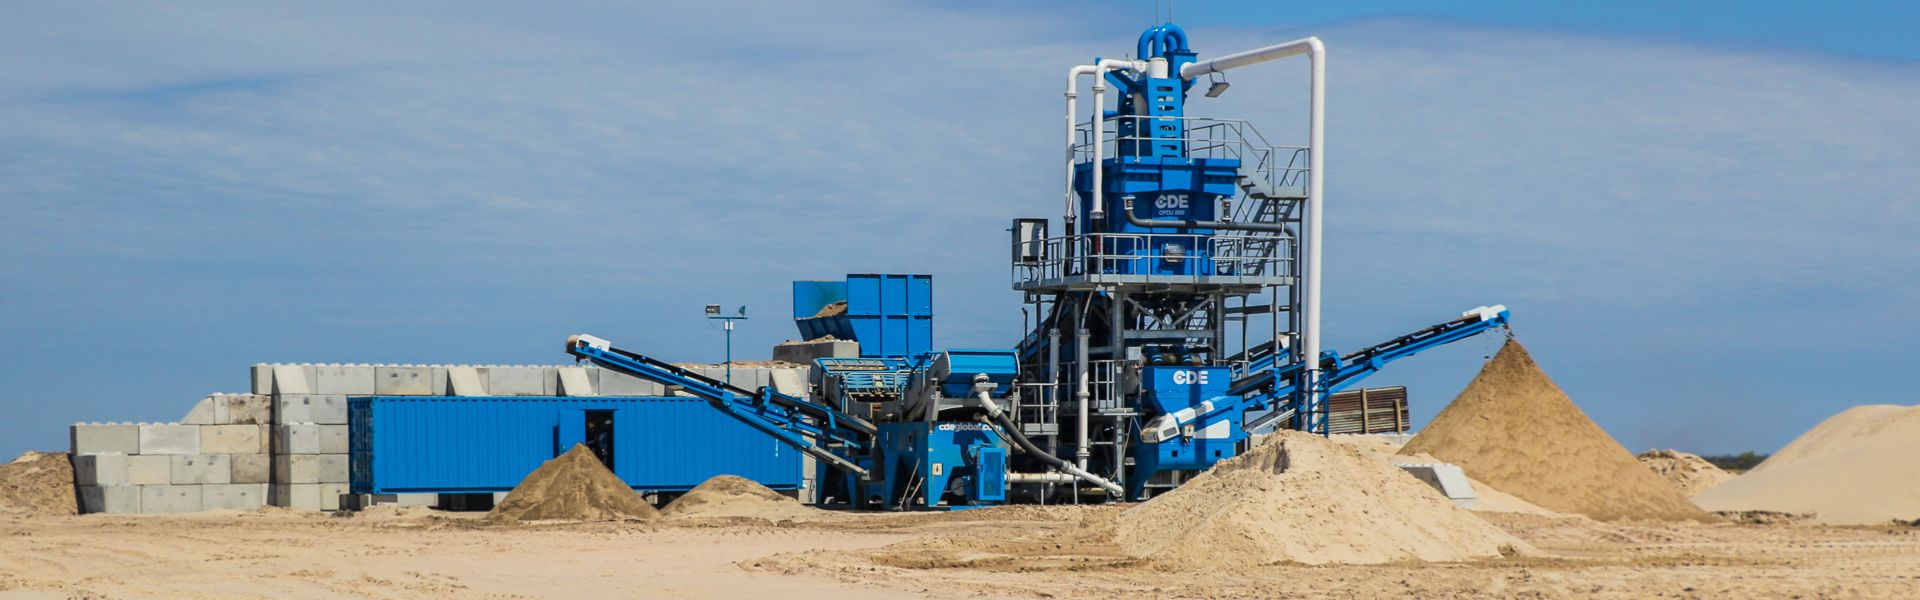 Maximising the potential of sand through lignite removal 